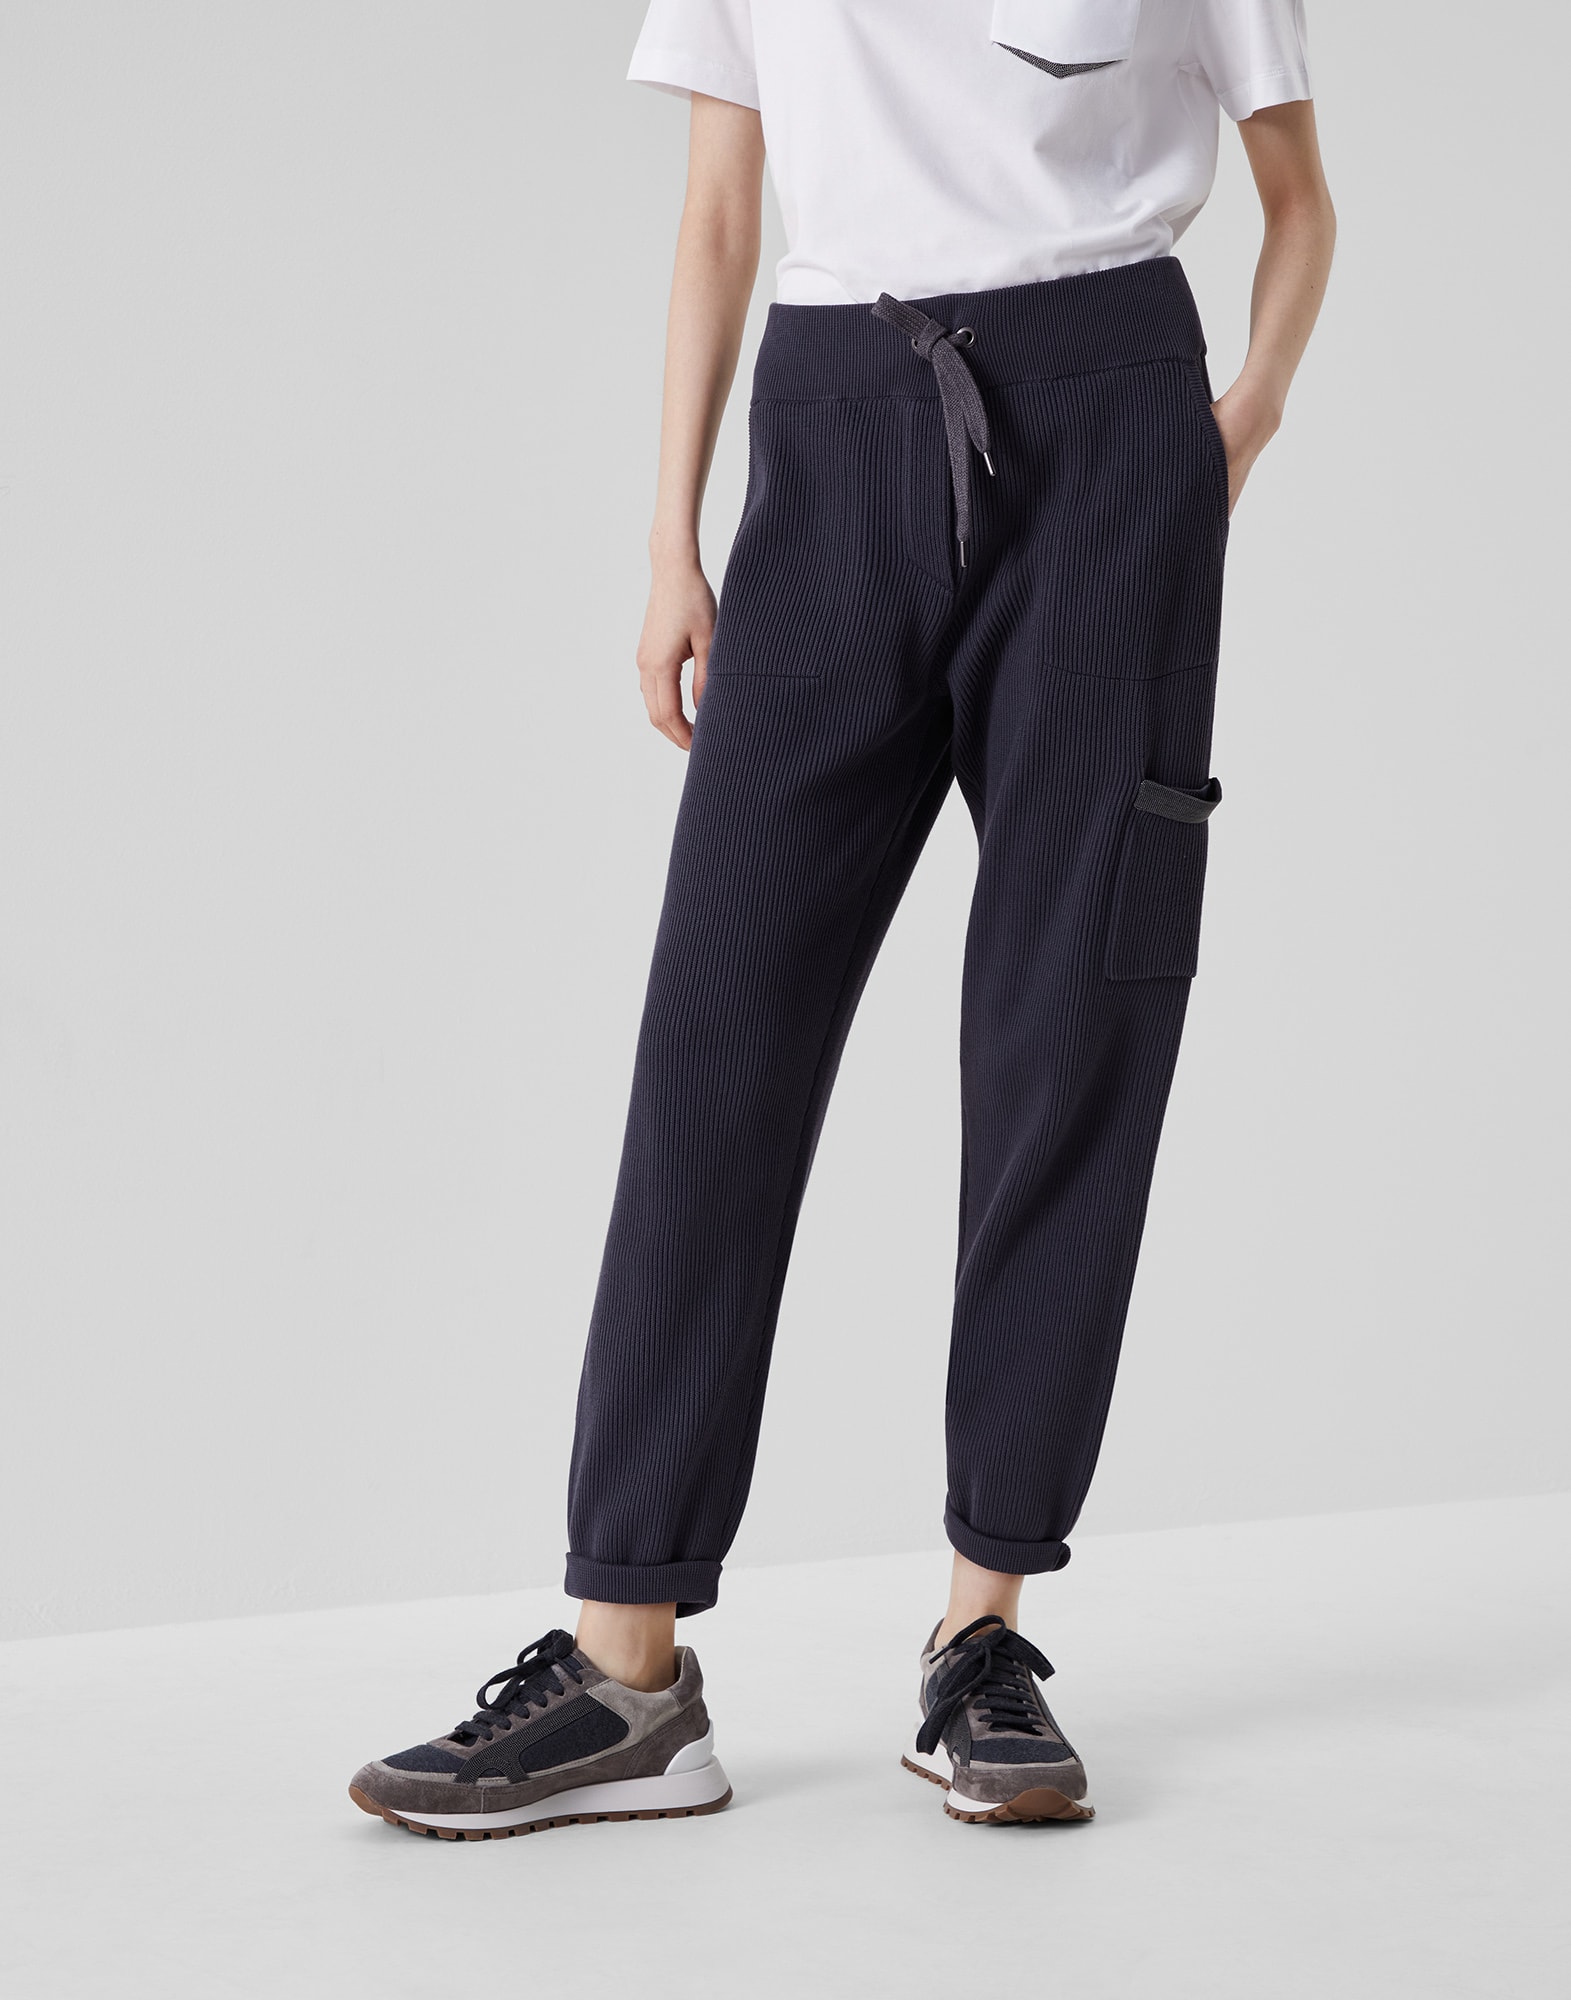 Joggers - Front view